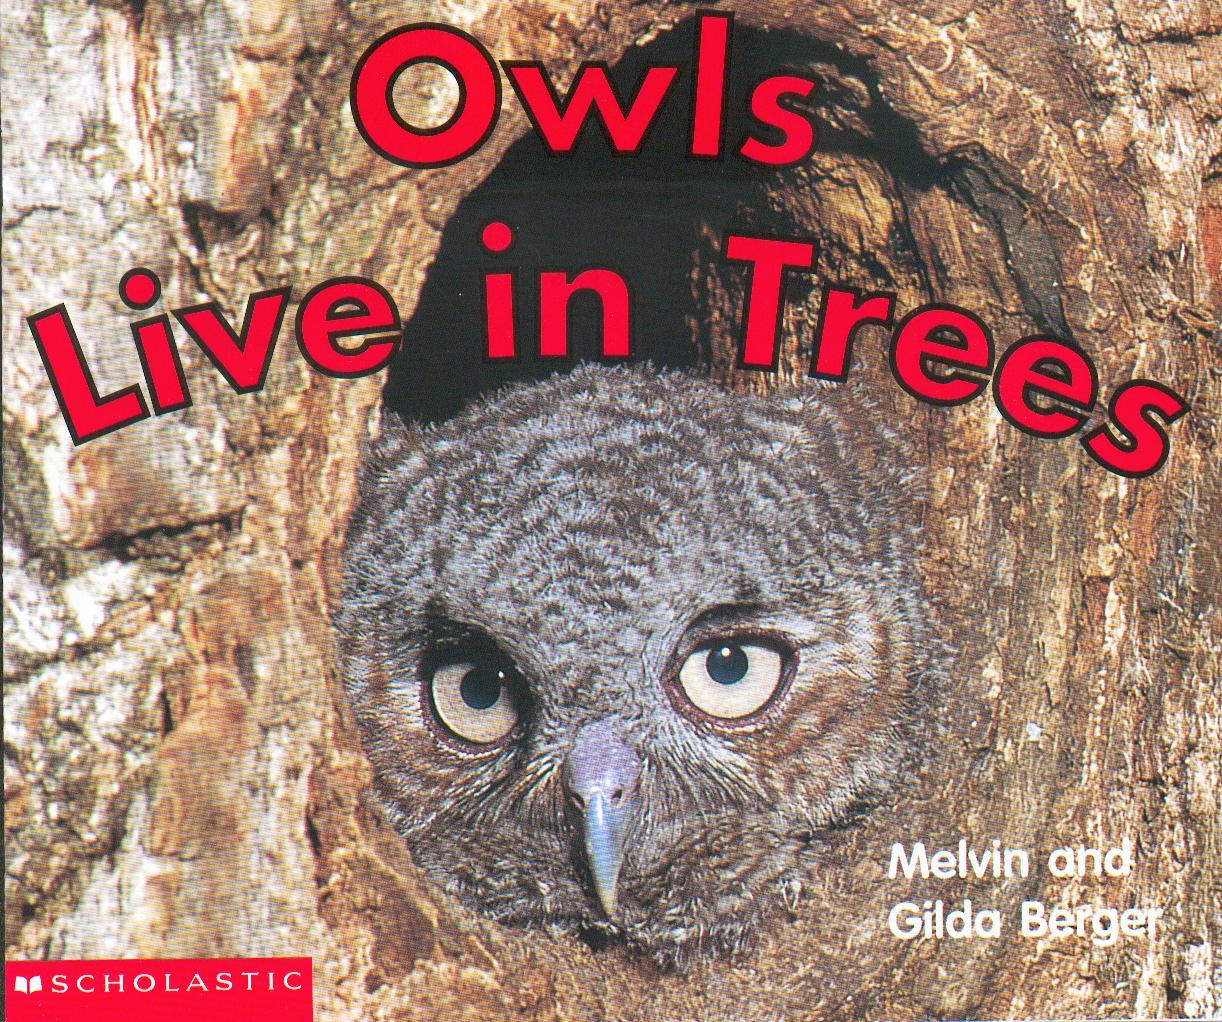 Owls live in trees / Melvin and Gilda Berger.